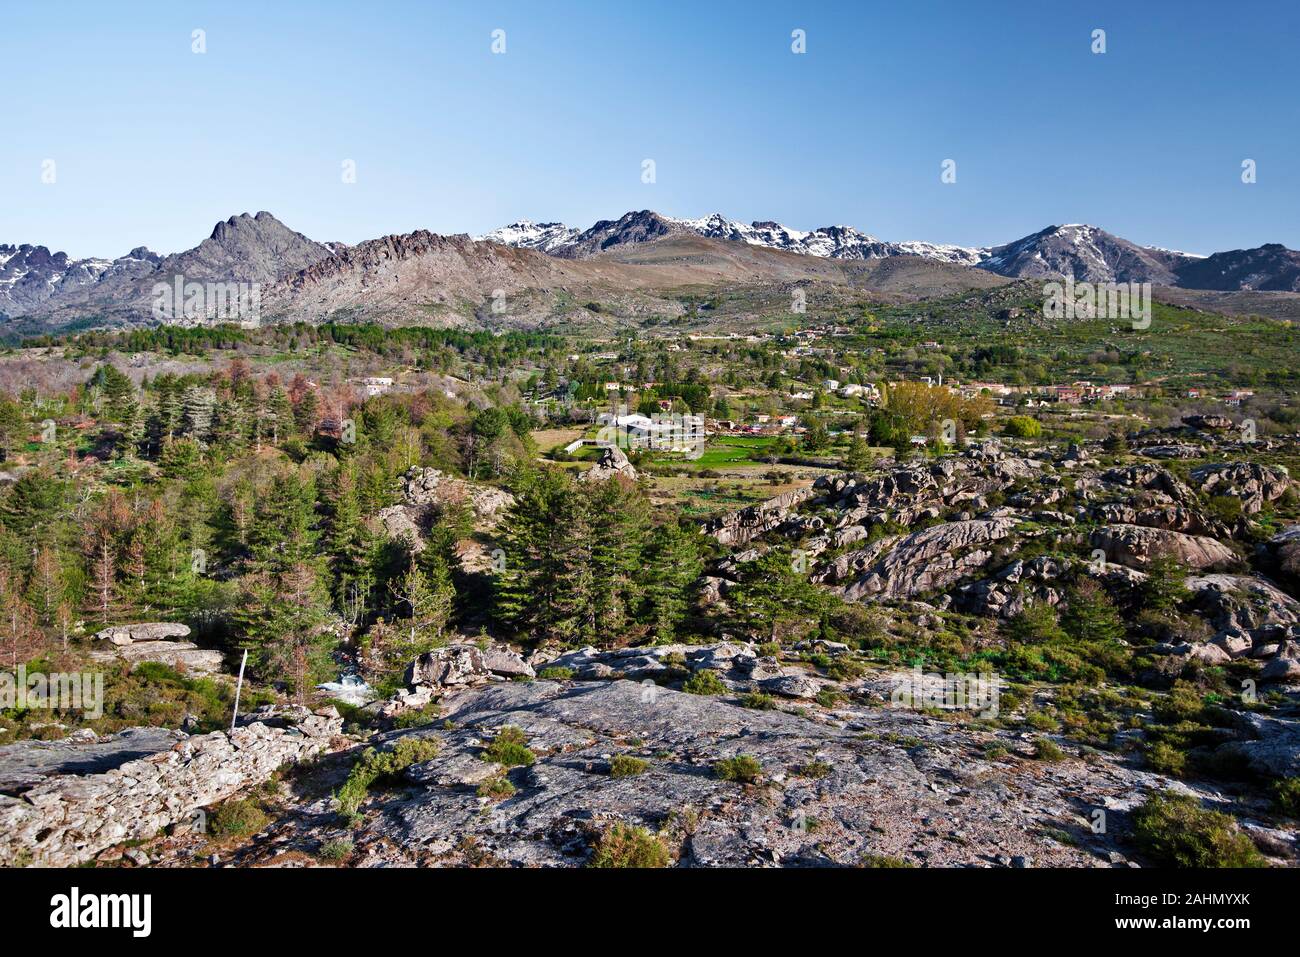 Niolo region in Central Corsica Dominated by Monte Cinto mountain chain, Albertasse village and farms mixed with rocky and forest landscape of Golo ri Stock Photo